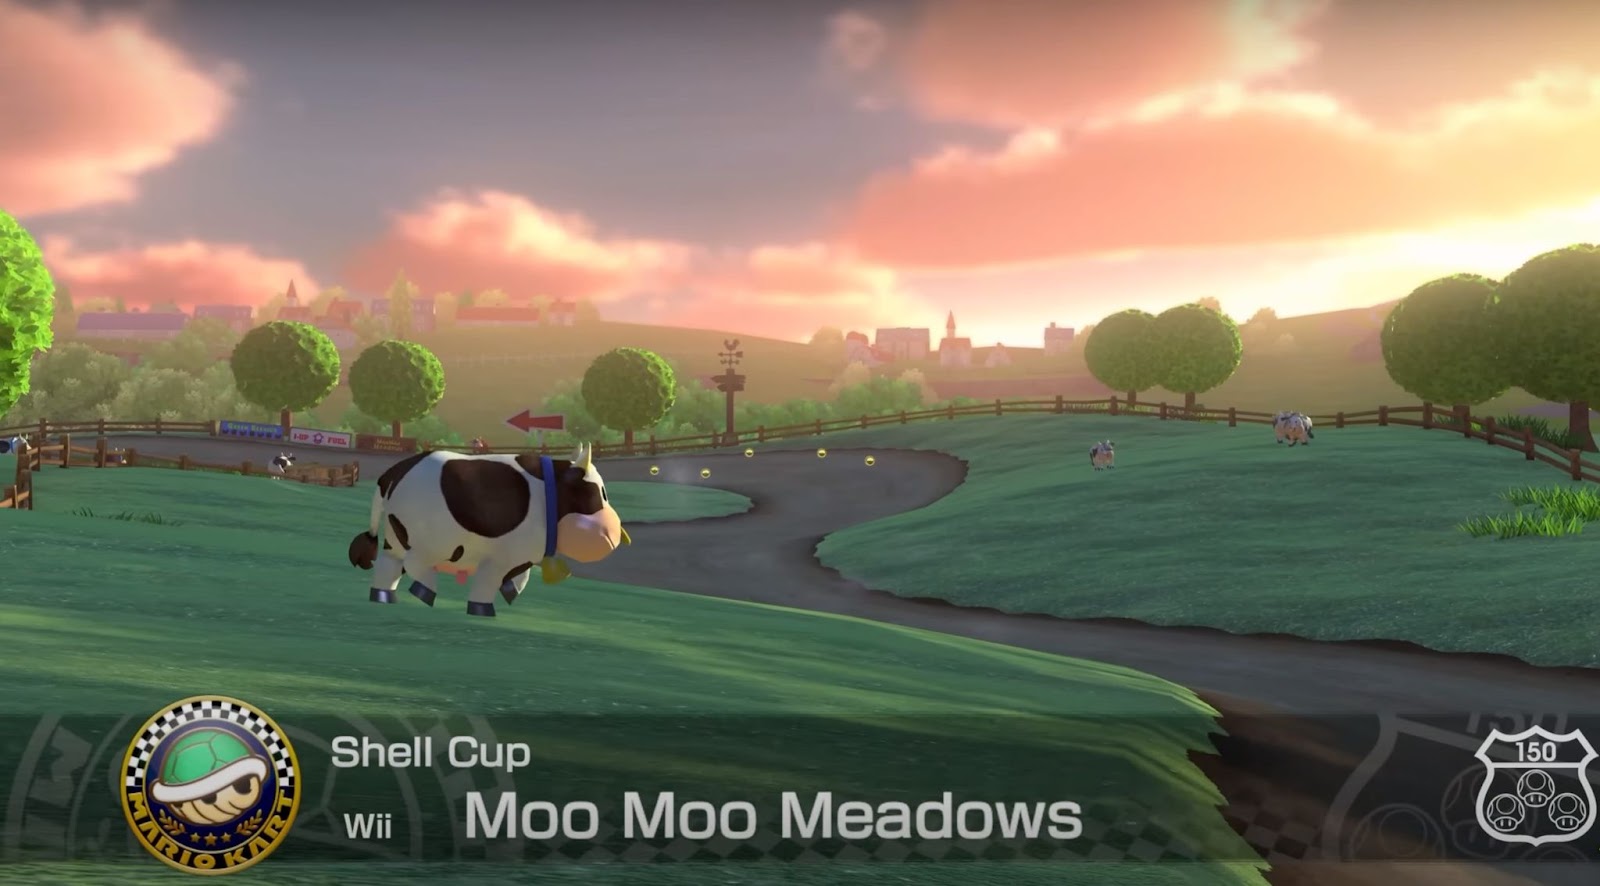 Tips For Playing Mario Kart 8 Like A Pro